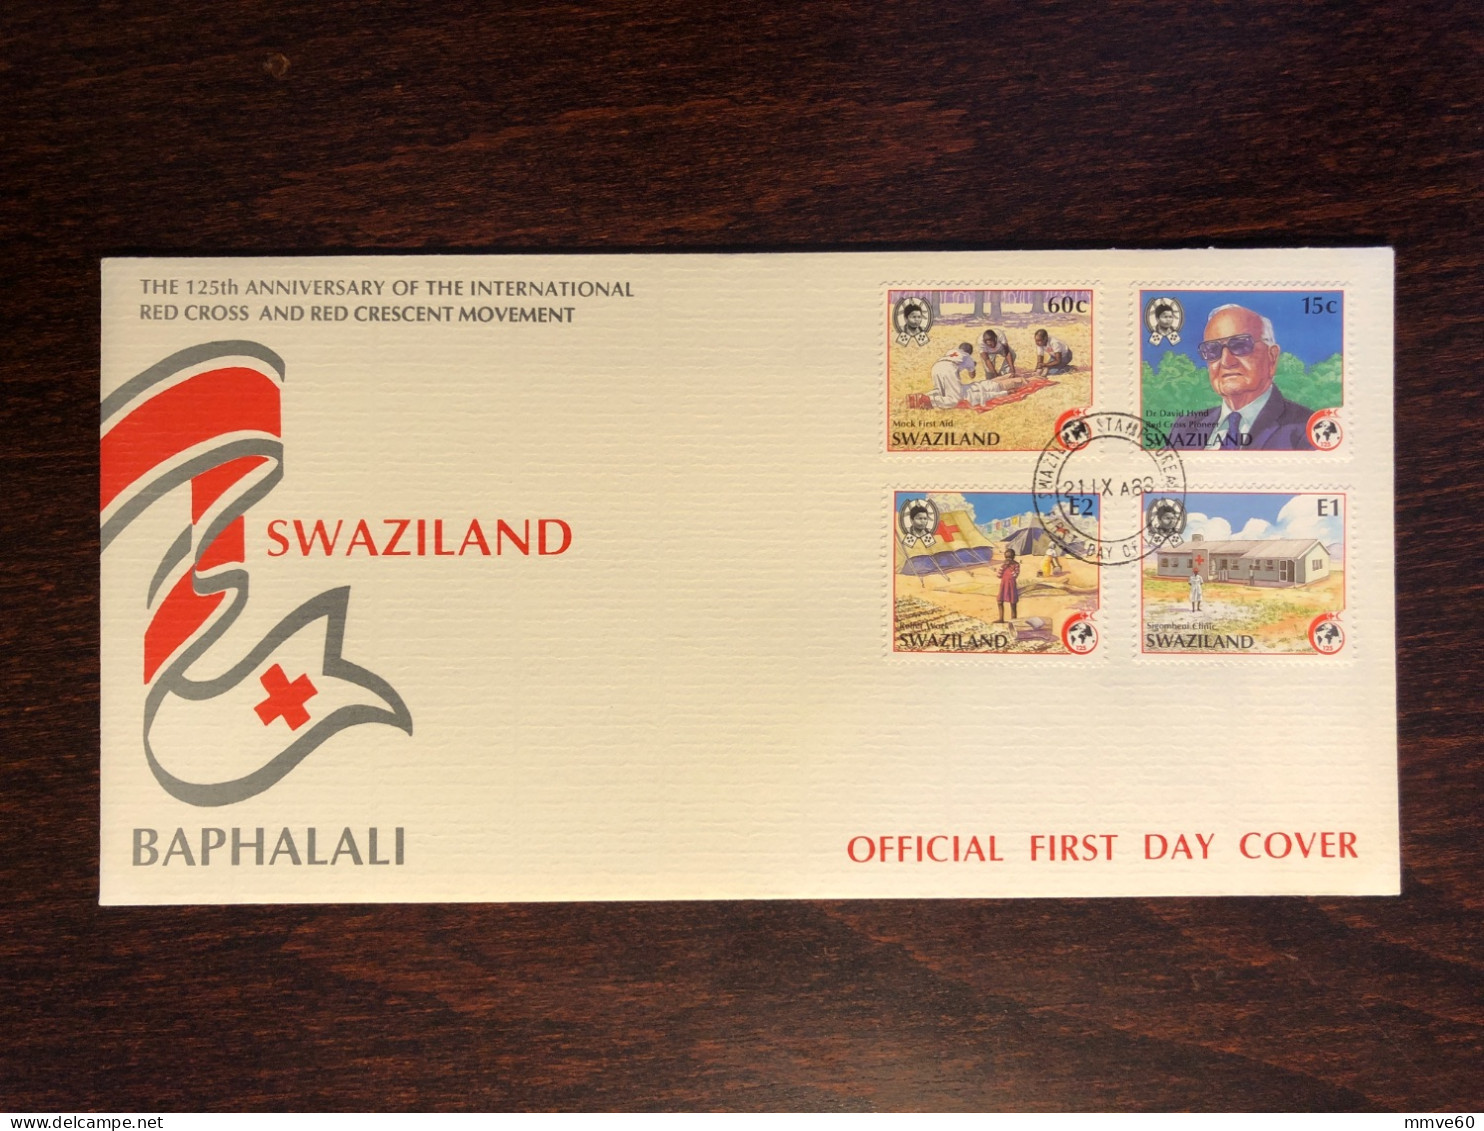 SWAZILAND FDC COVER 1988 YEAR RED CROSS HOSPITAL AID HEALTH MEDICINE STAMPS - Swaziland (1968-...)